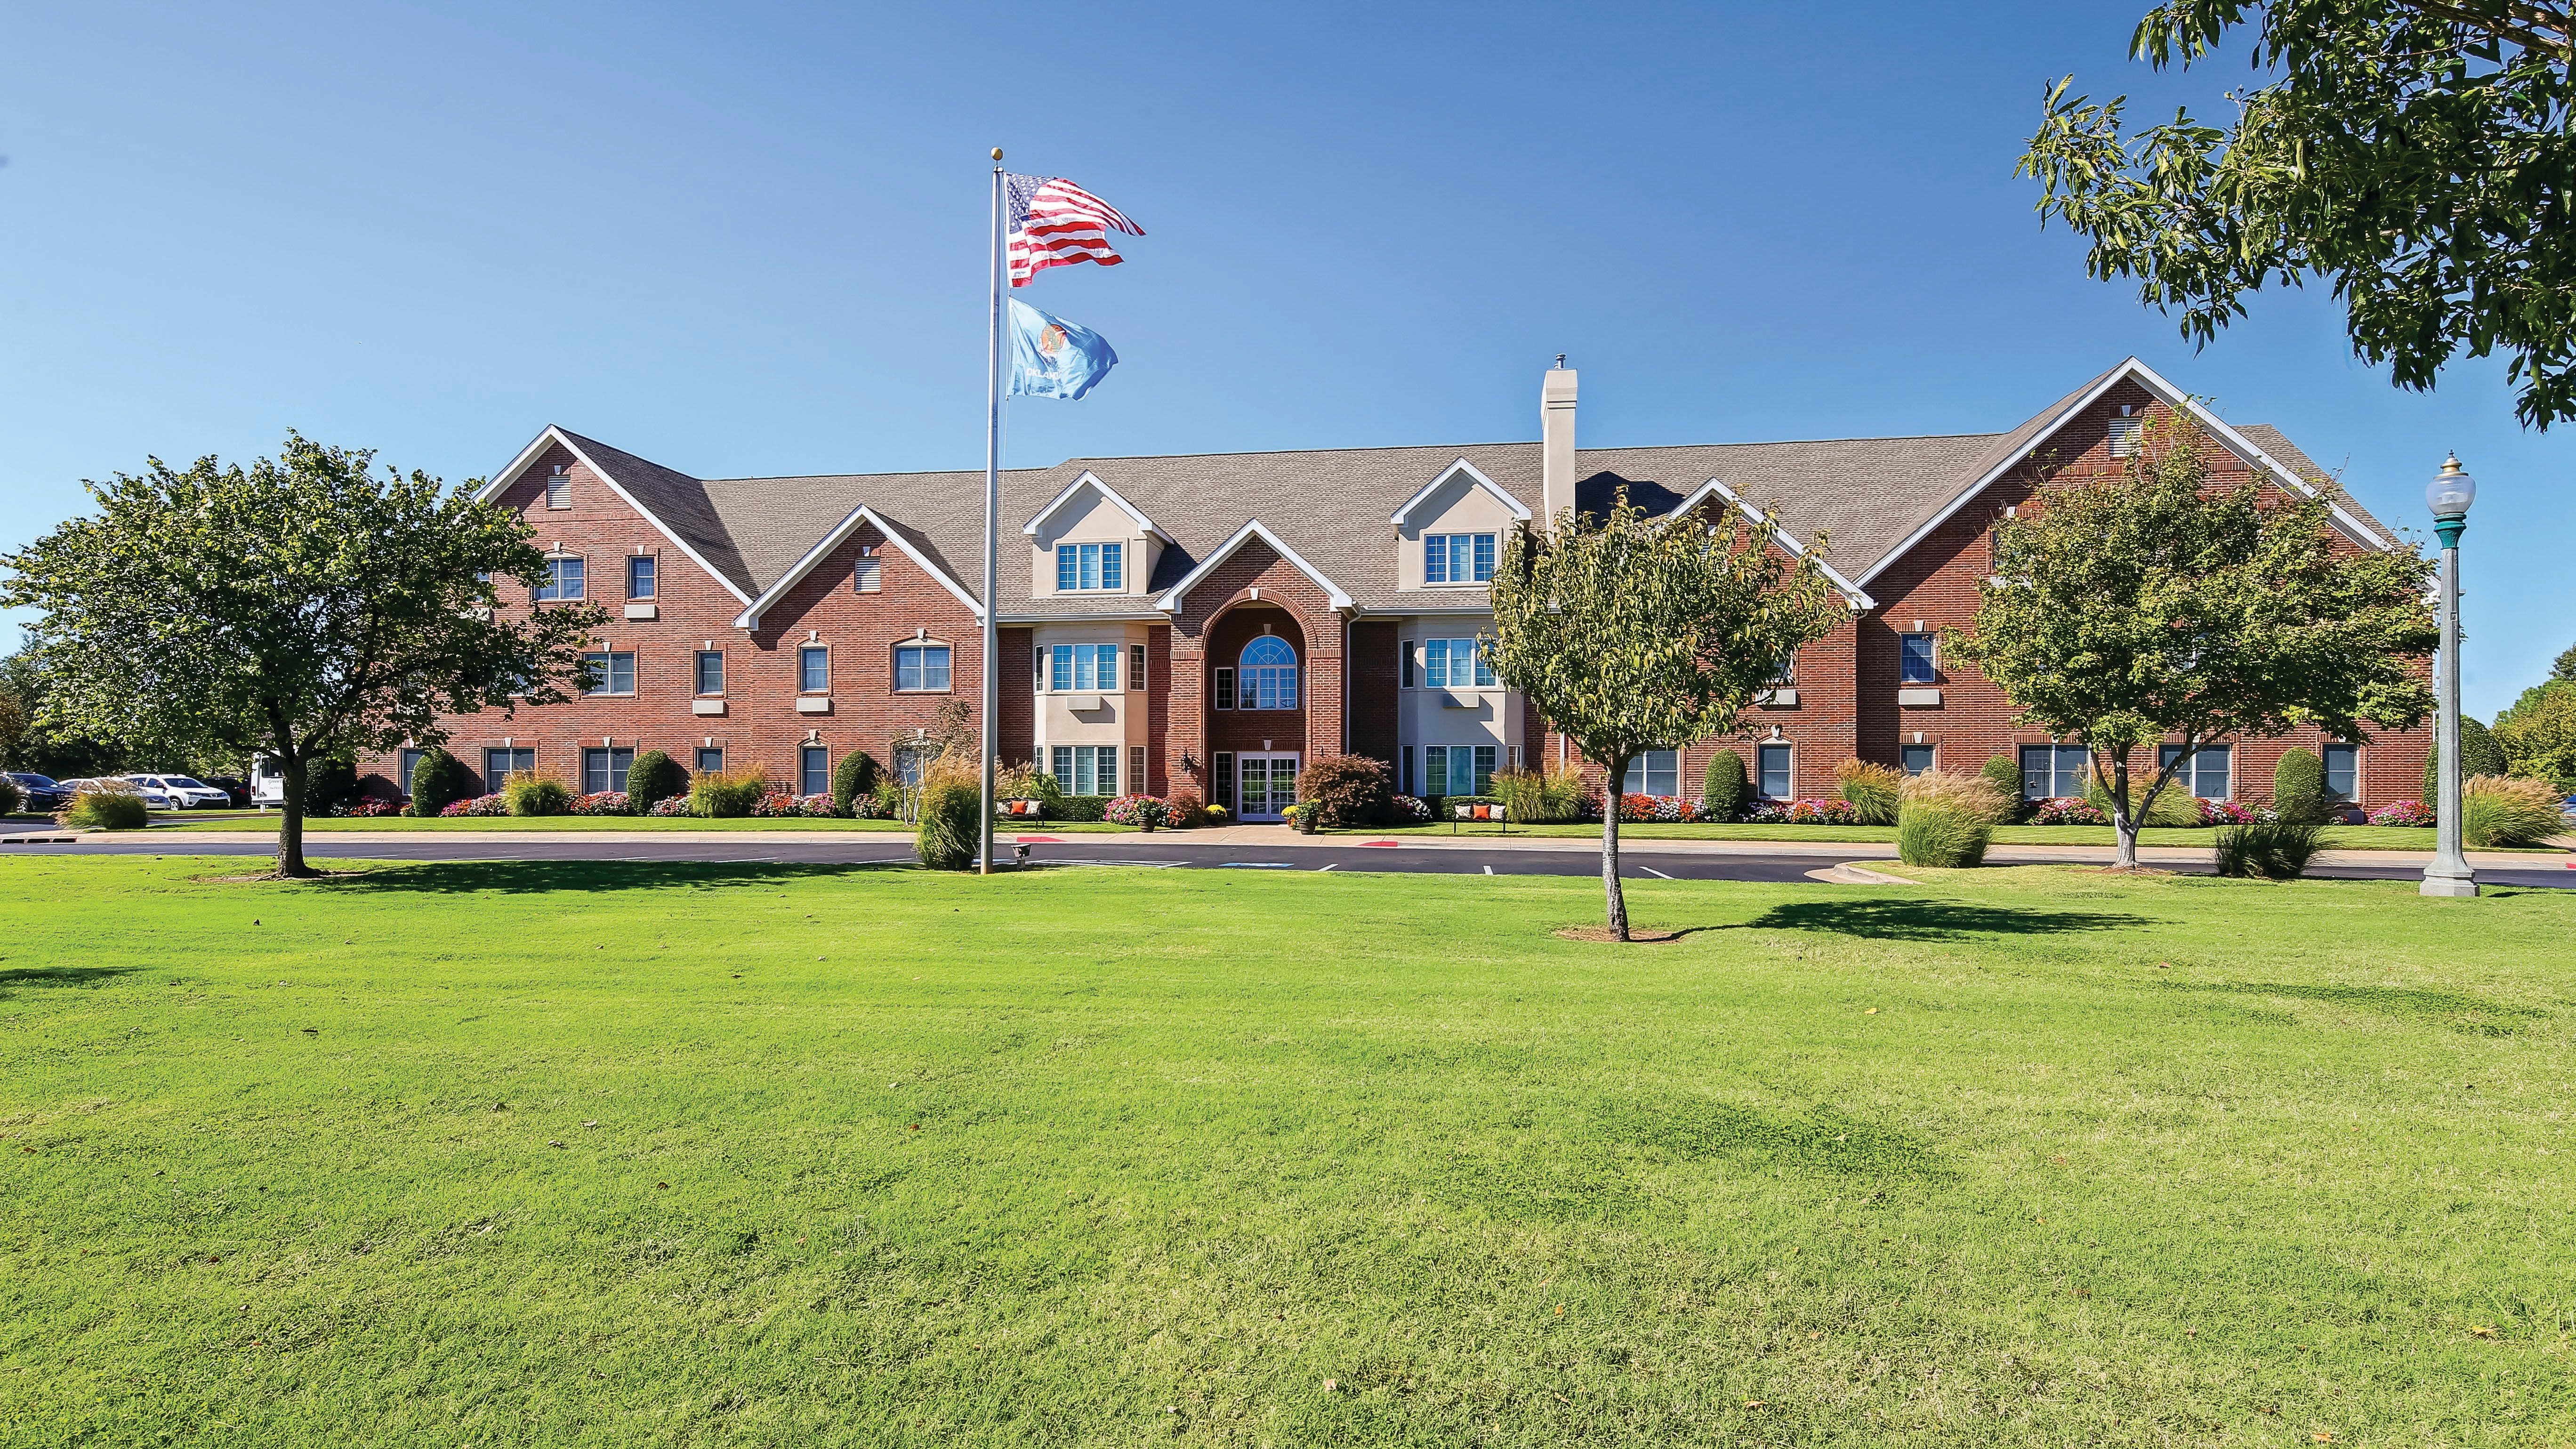 Green Tree Assisted Living and Memory Care community exterior